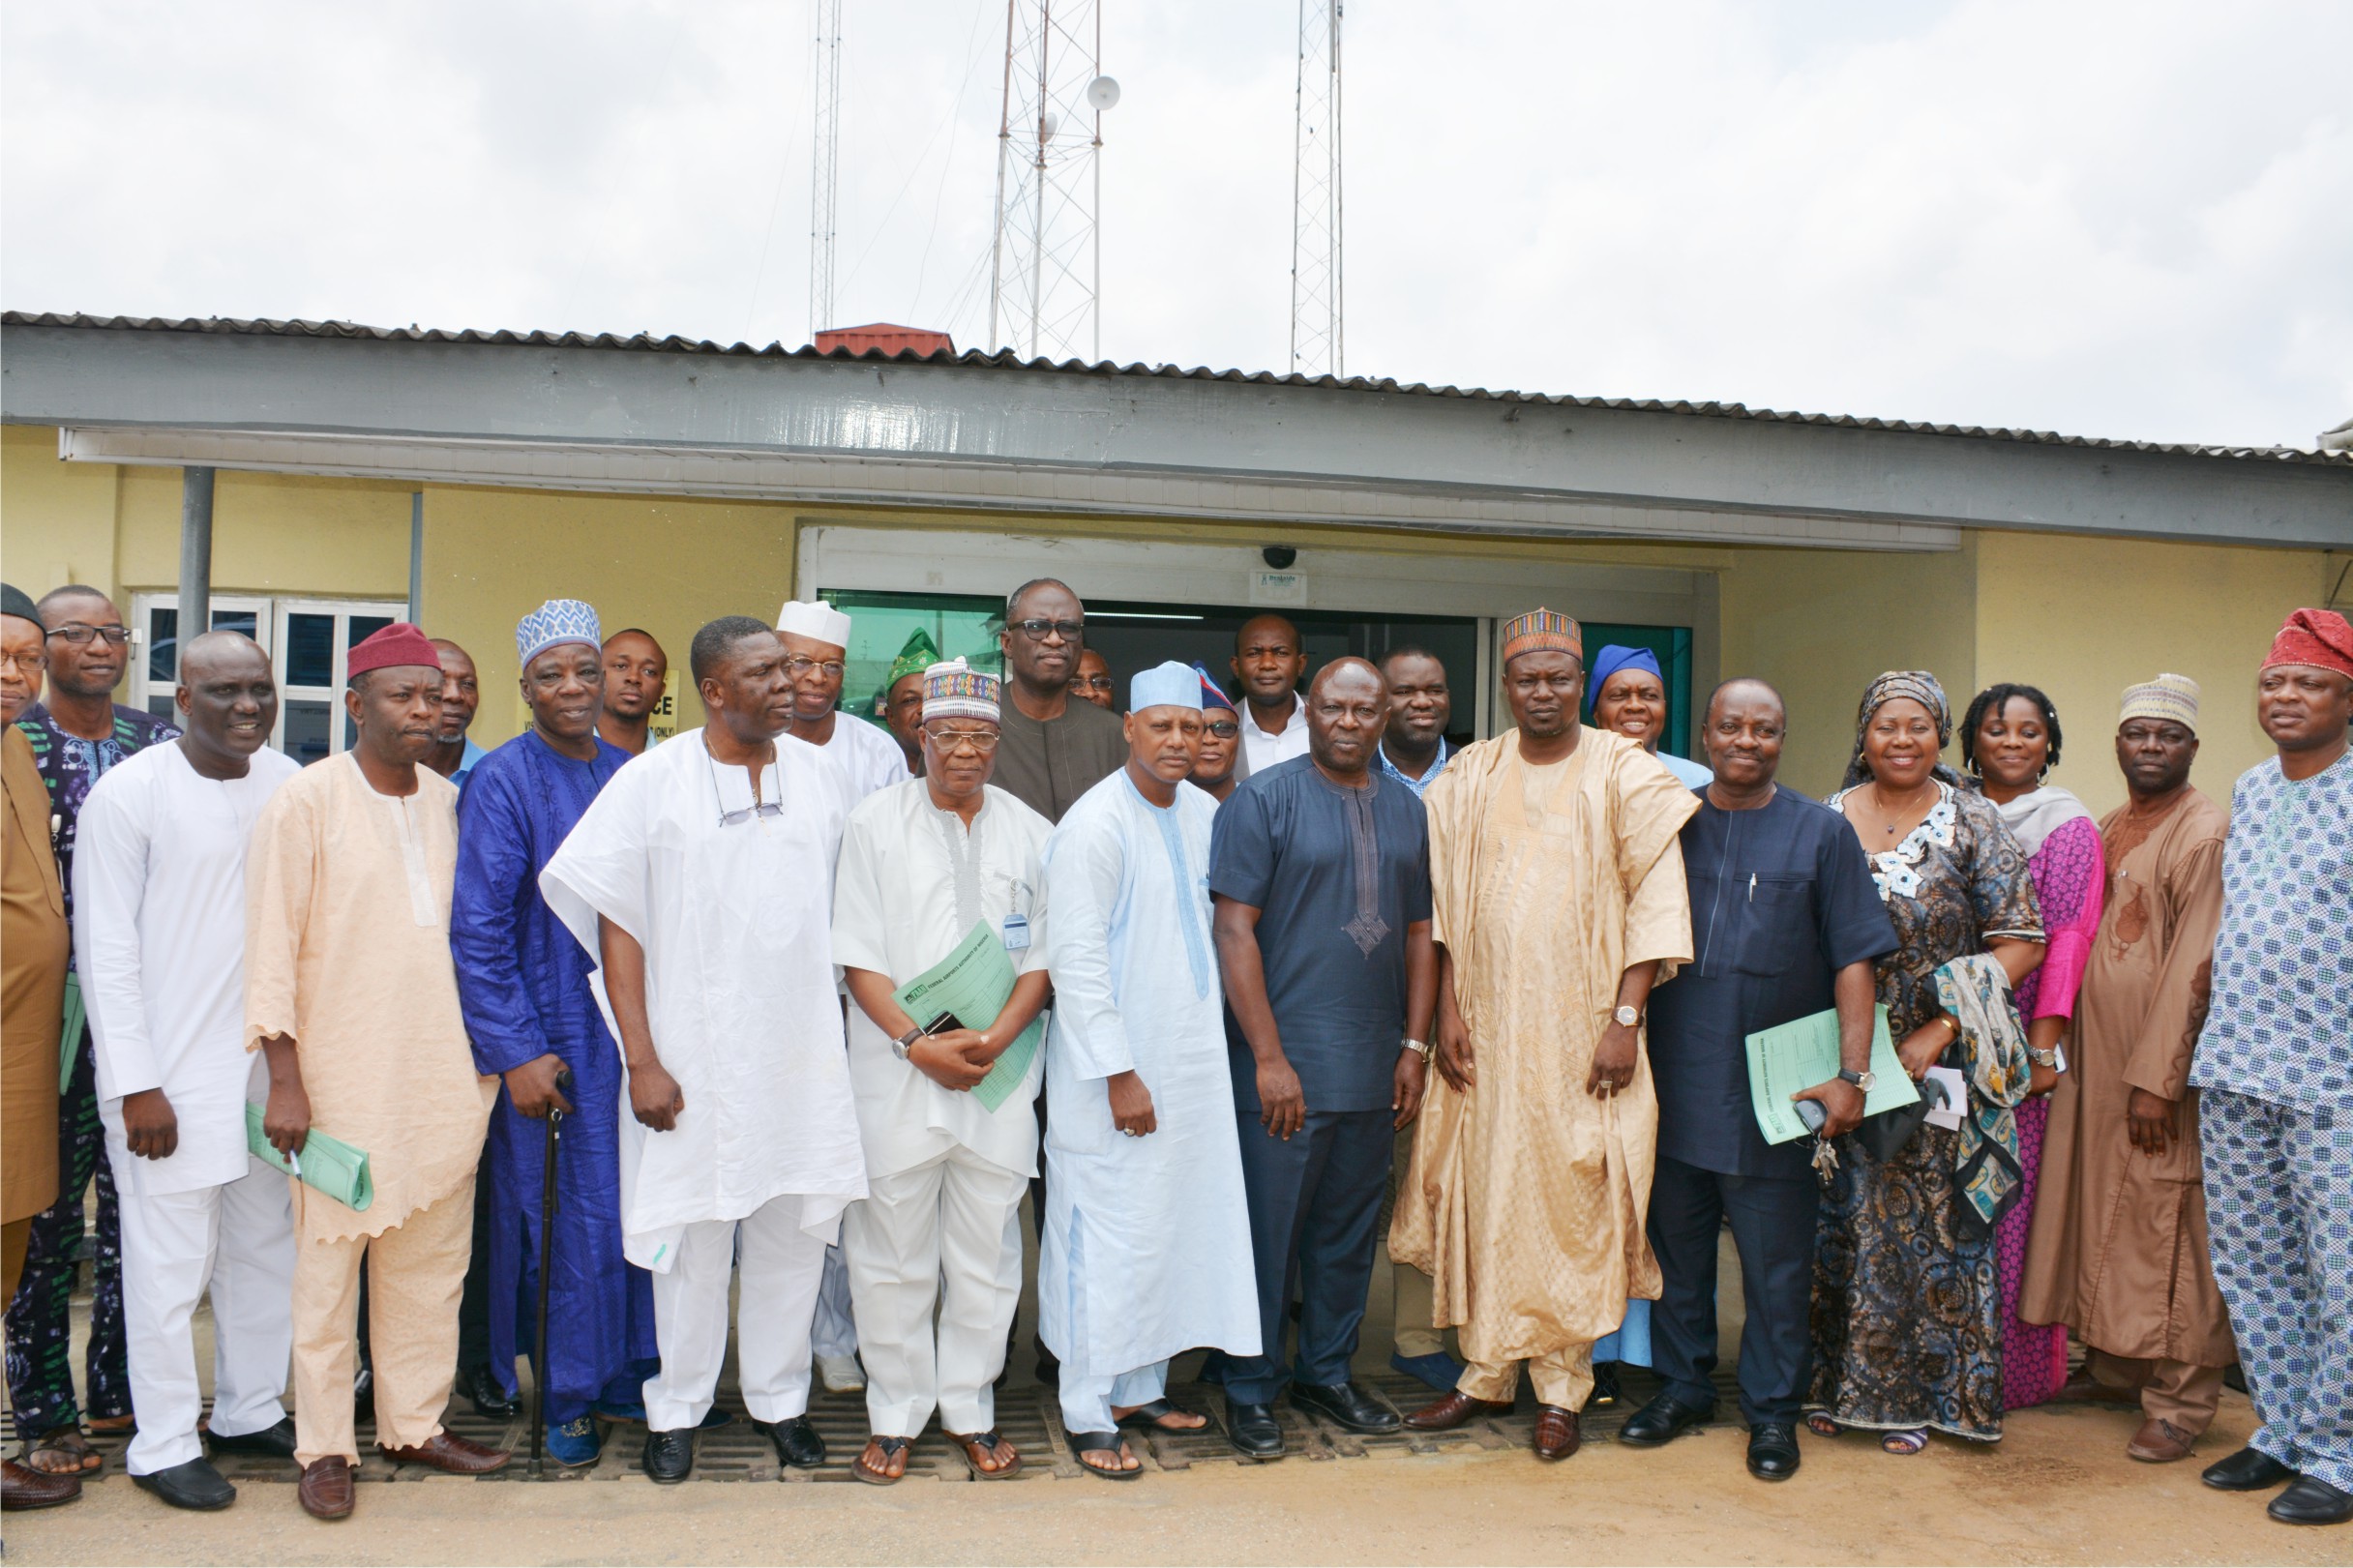  Representatives of Federal Airports Authority of Nigeria (FAAN) and Lagos State Government in a group photograph after a deliberation on the project.   